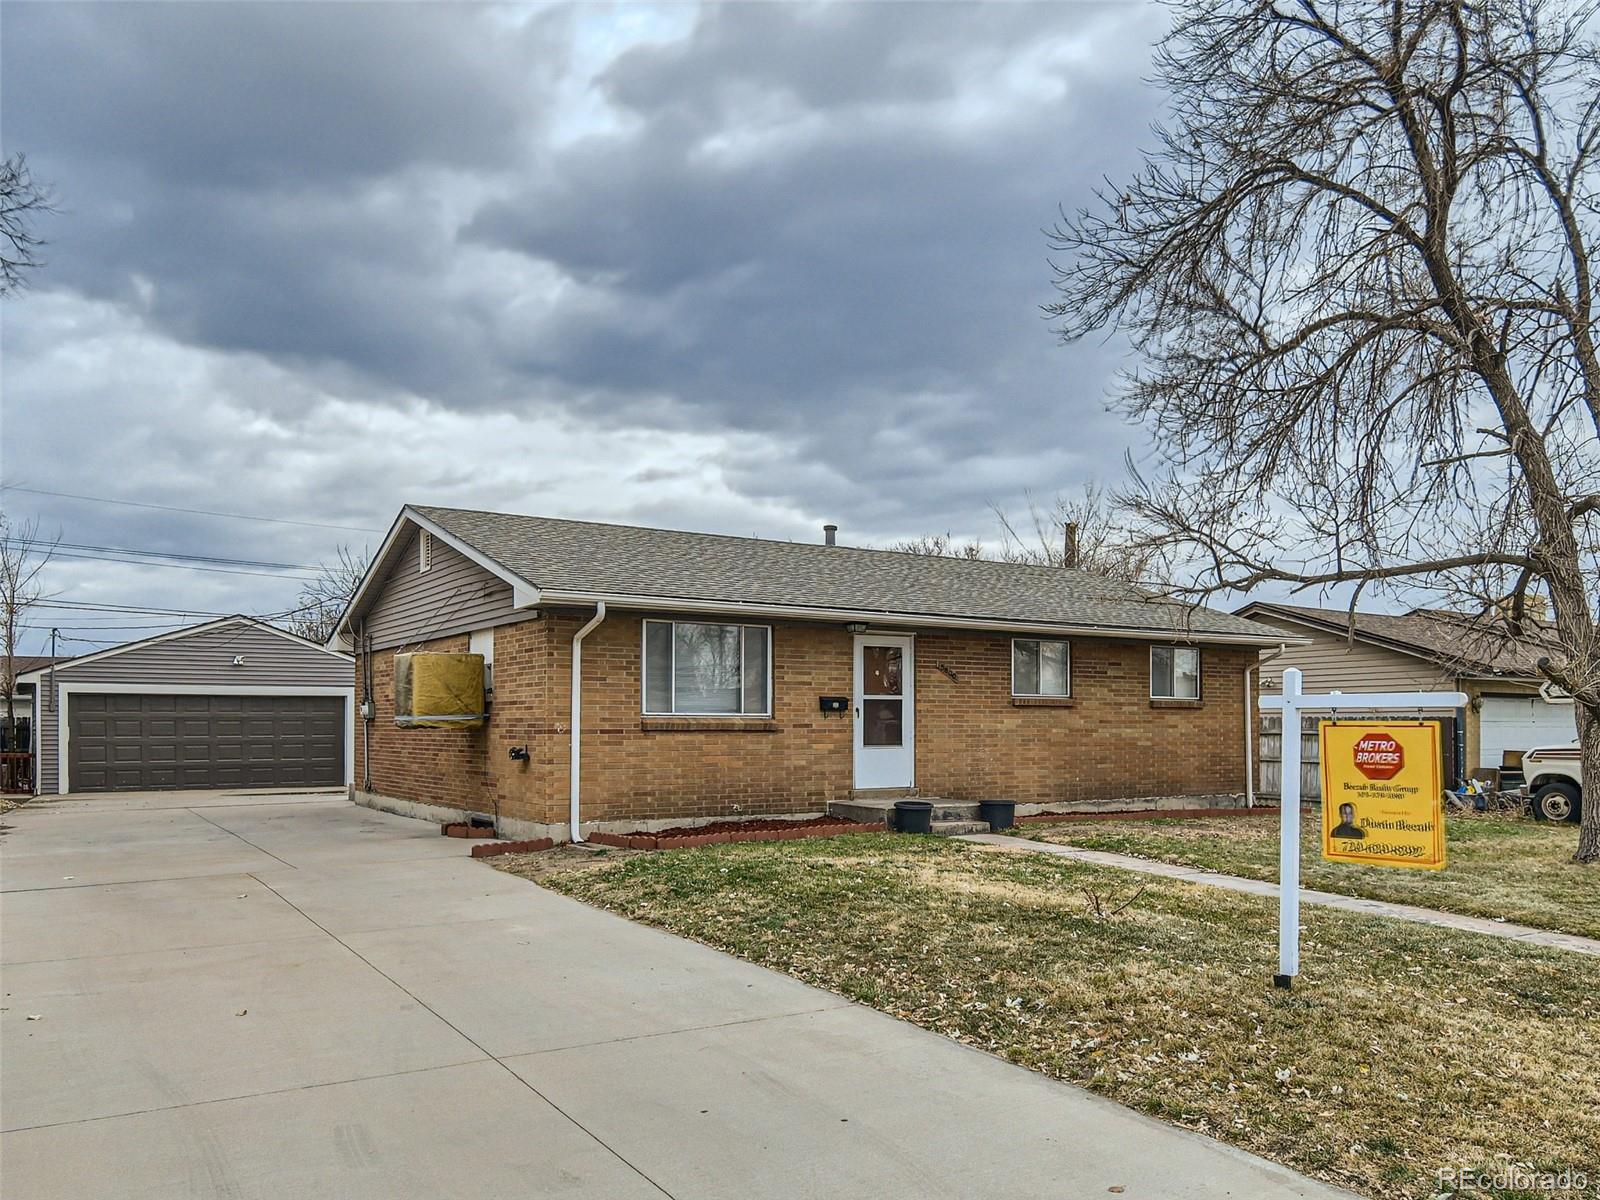 5800 E 68th Way, commerce city MLS: 2592944 Beds: 4 Baths: 3 Price: $460,000